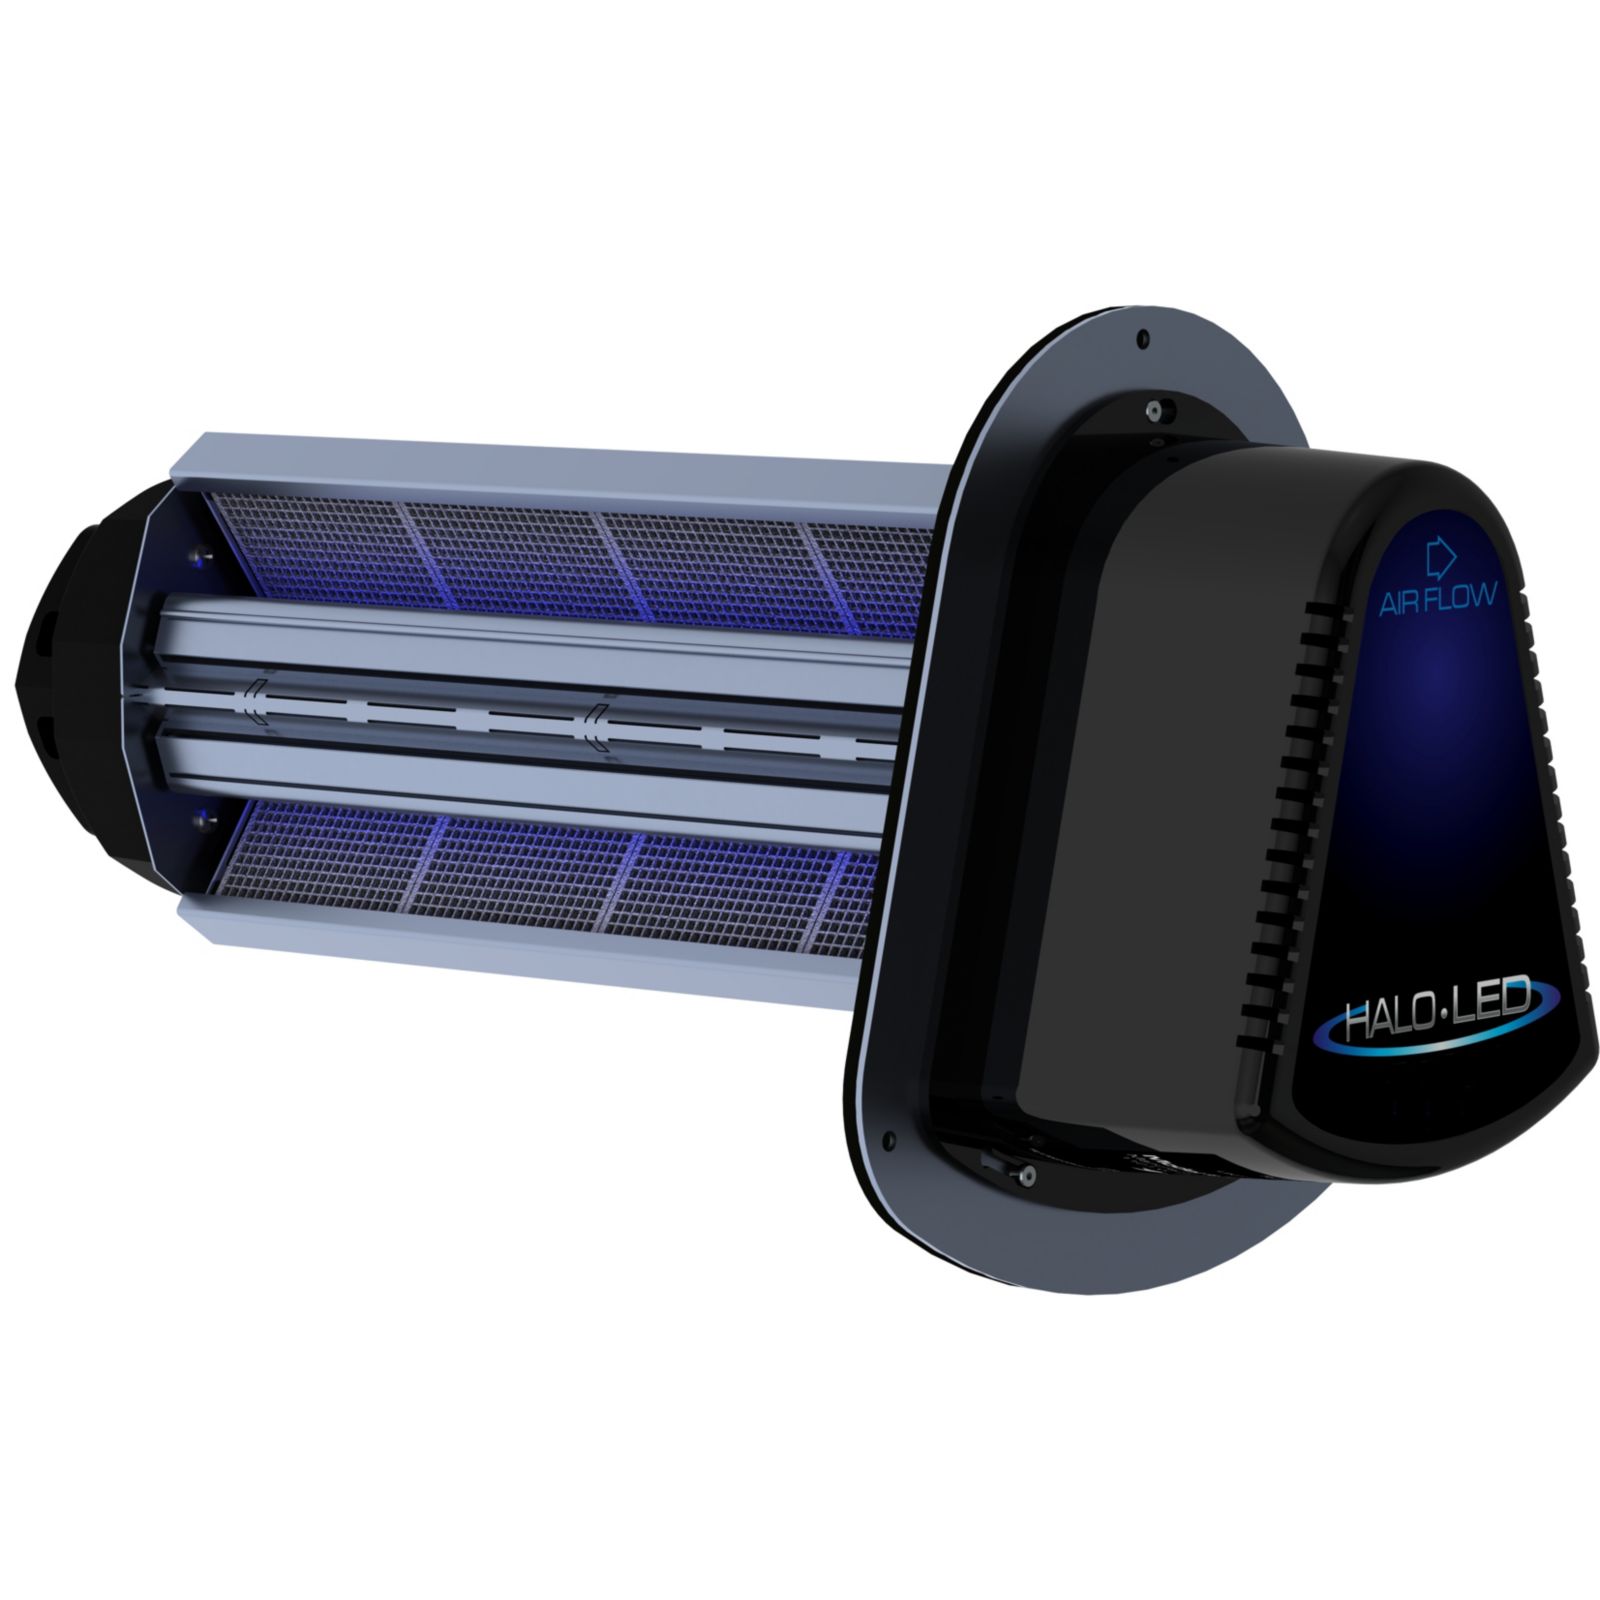 REME HALO-LED Whole Home In-Duct Air Purifier (UV Light)